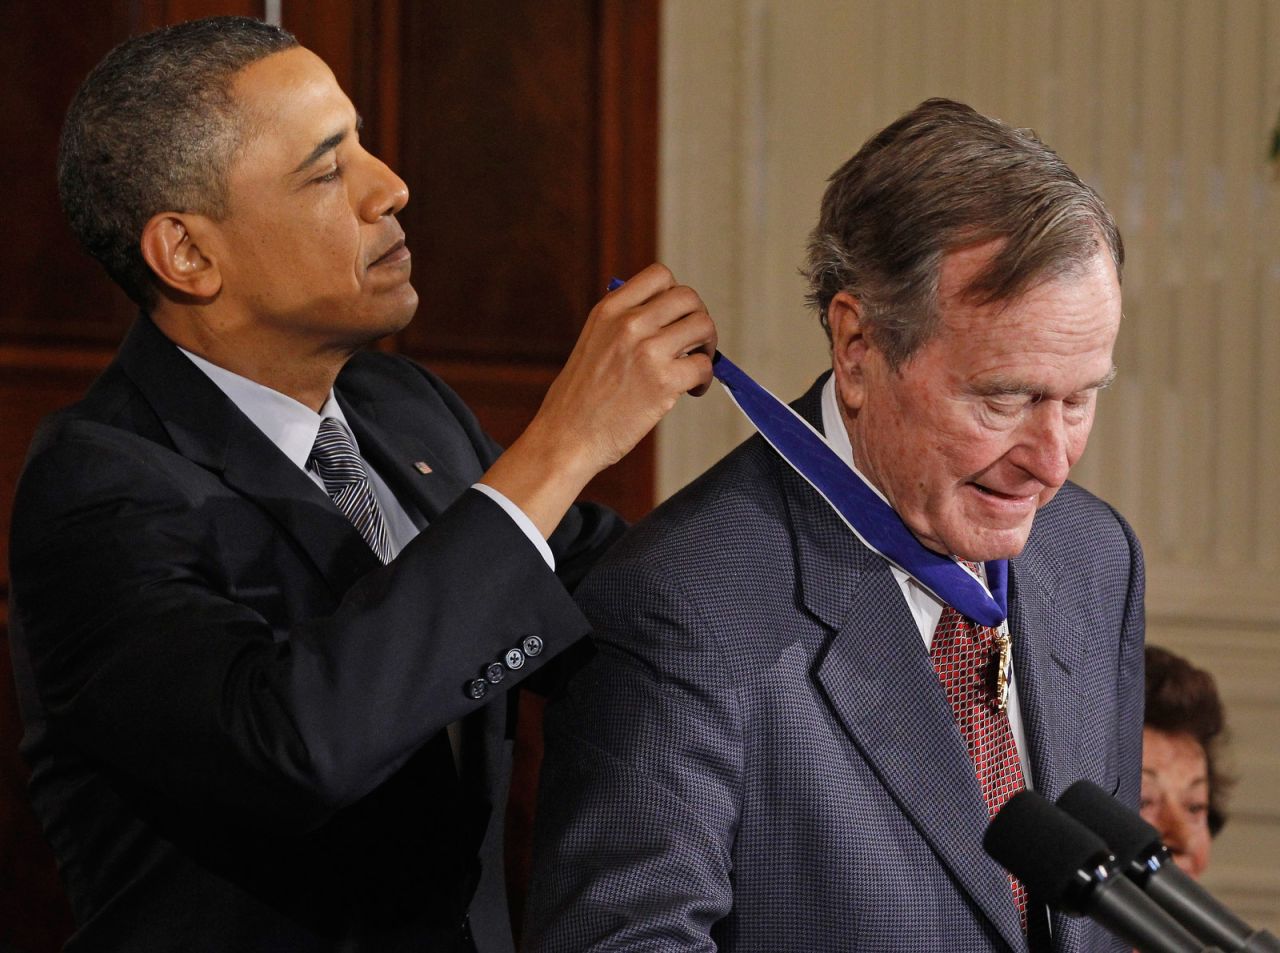 President Barack Obama presents Bush with the Medal of Freedom in February 2011. "His life is a testament that public service is a noble calling. ... His humility and his decency reflects the very best of the American spirit," Obama said.